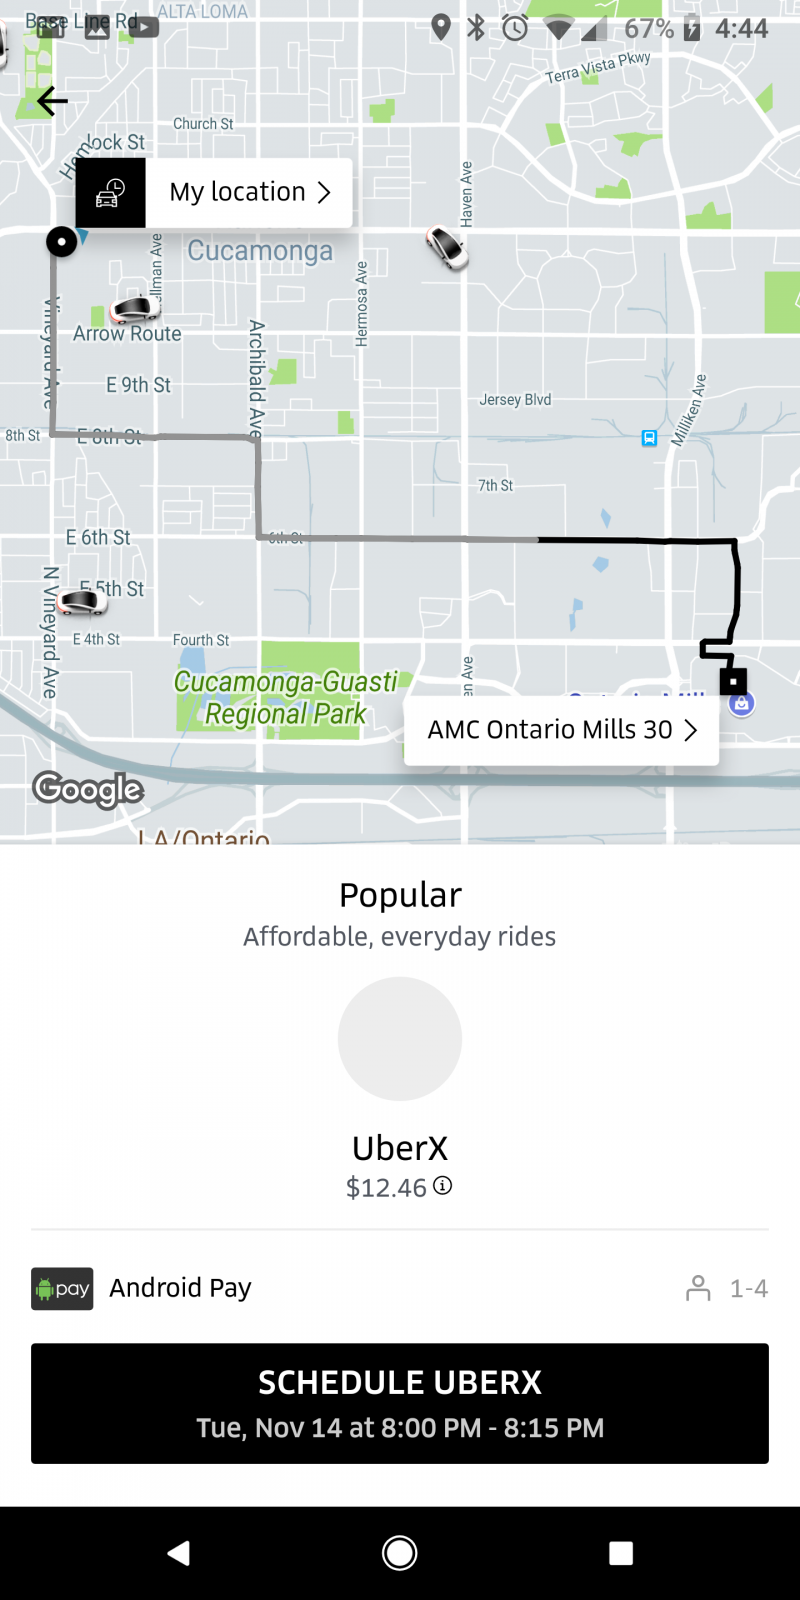 Uber locks in fares if you schedule rides far enough ahead of time